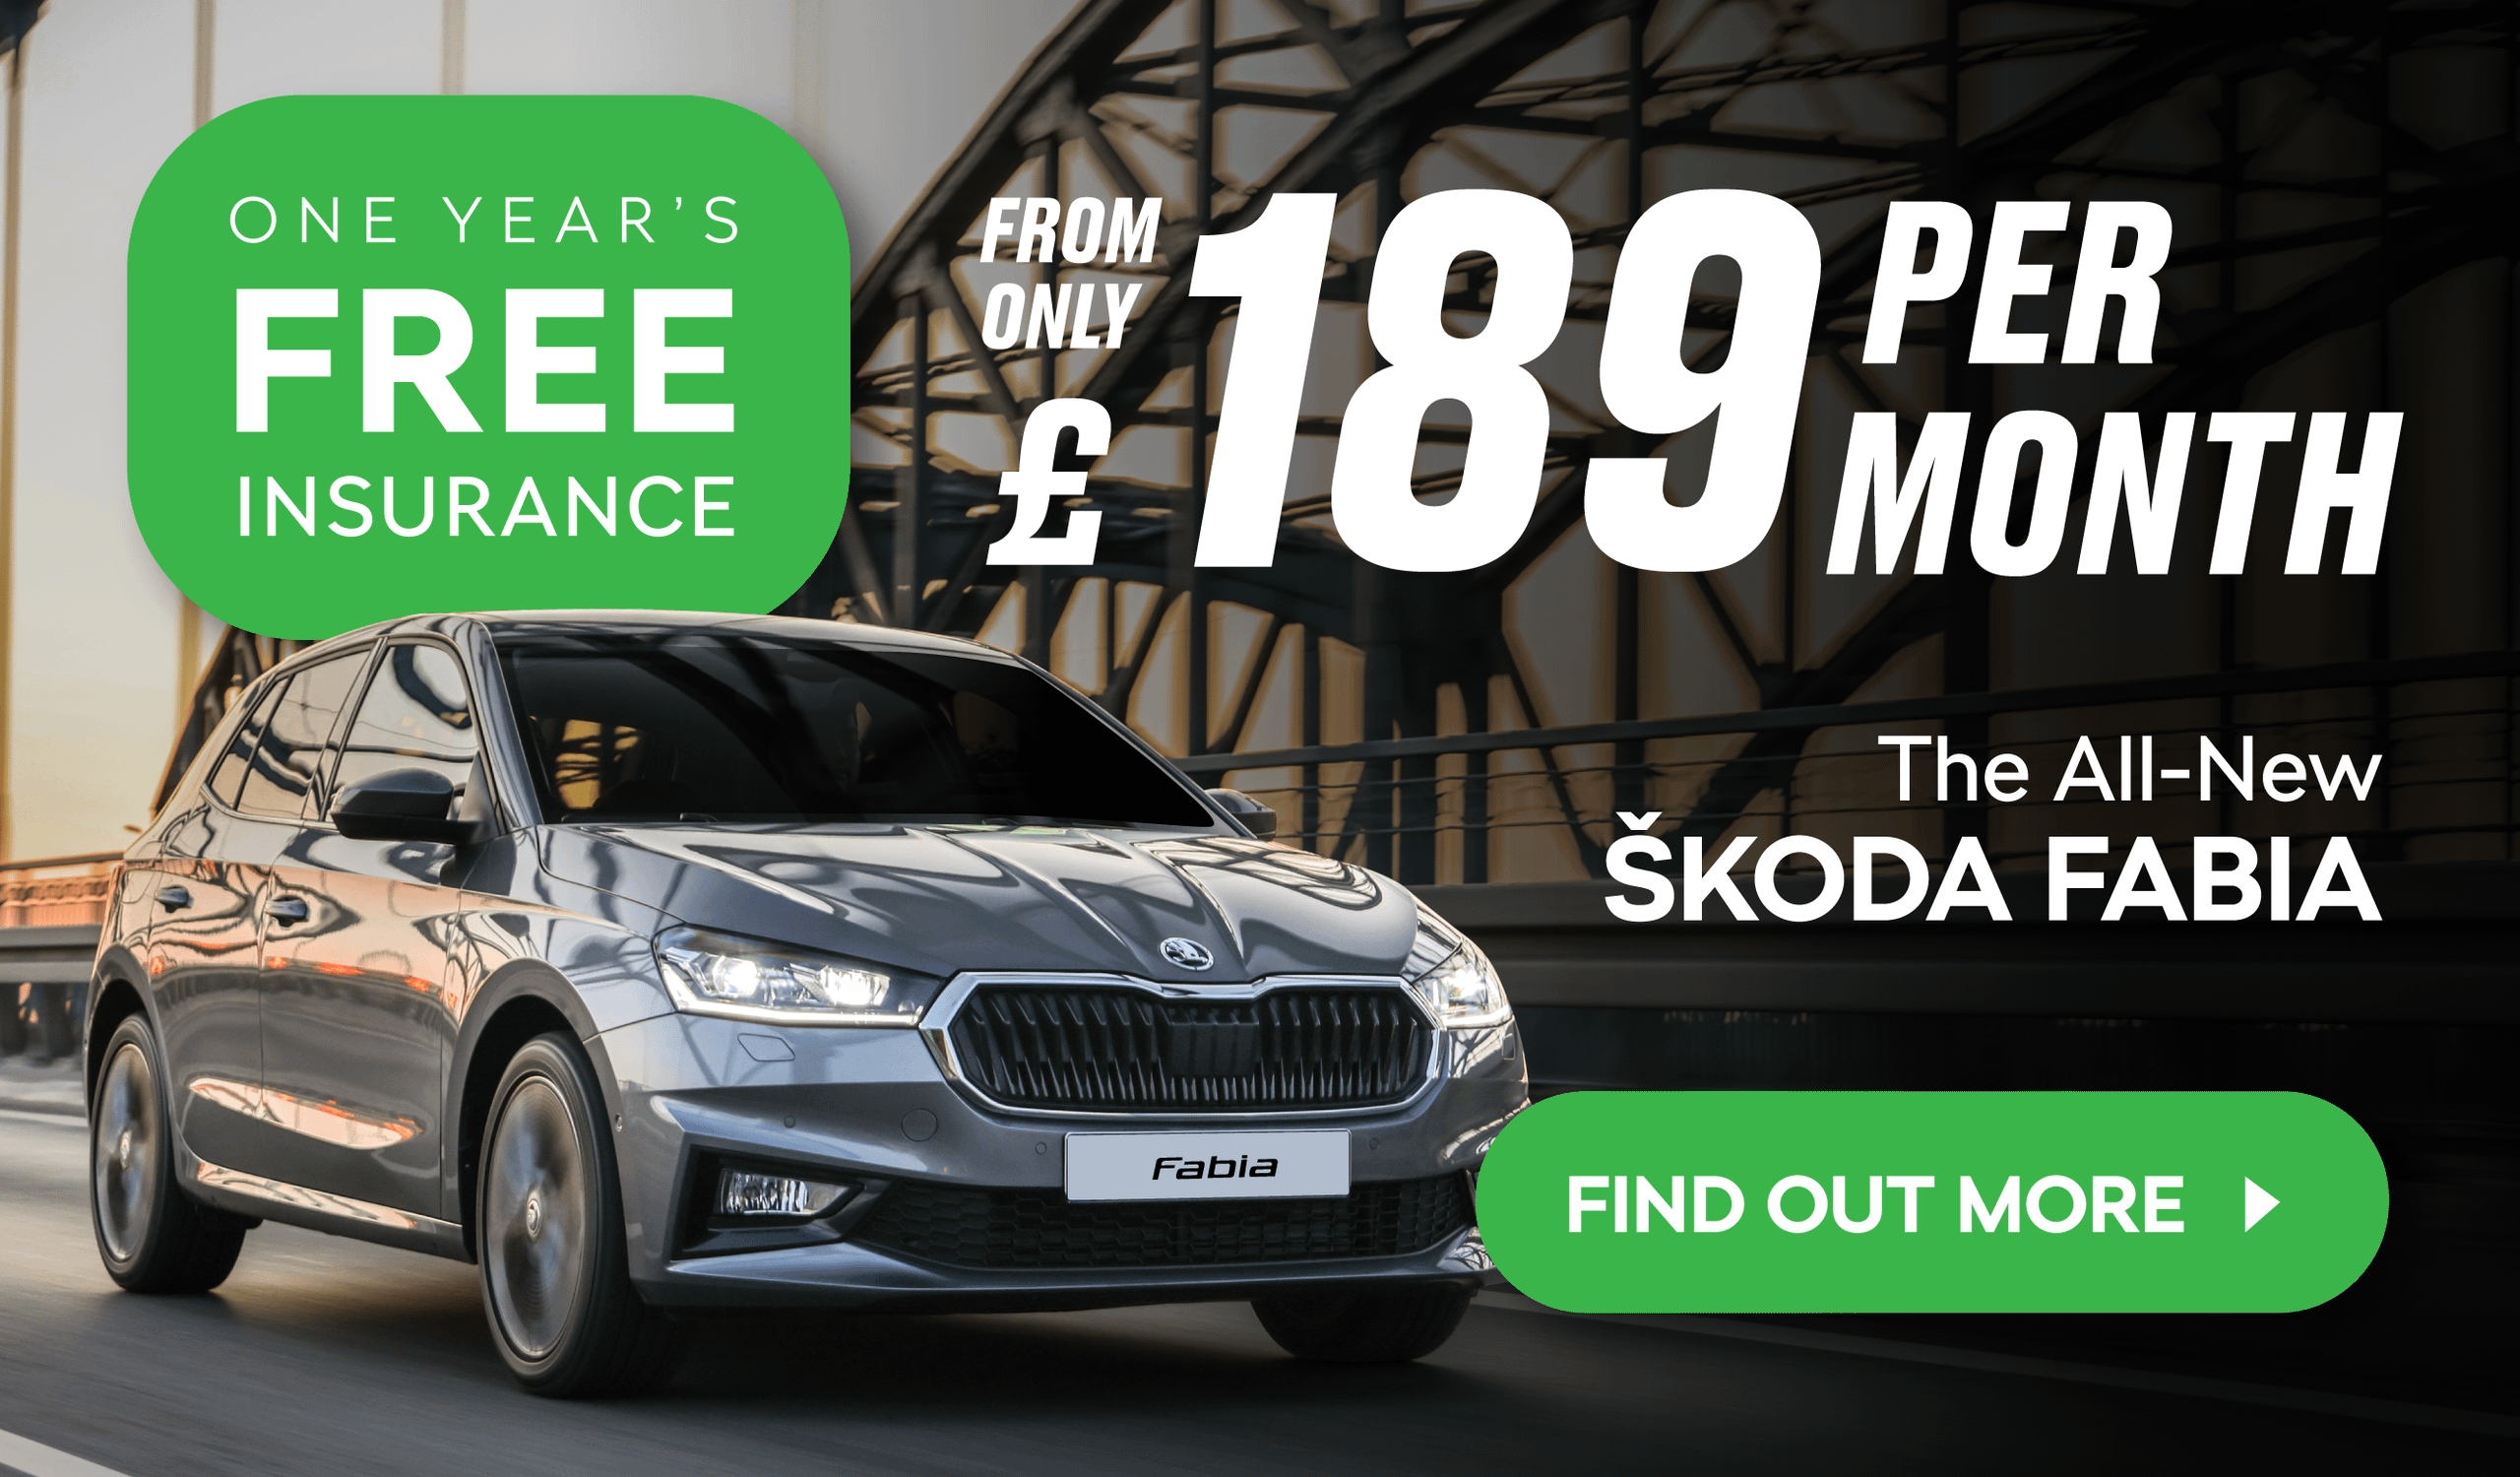 SKODA Fabia Offer - From £189 Per Month + 1 Year's FREE Insurance - Homepage Banner